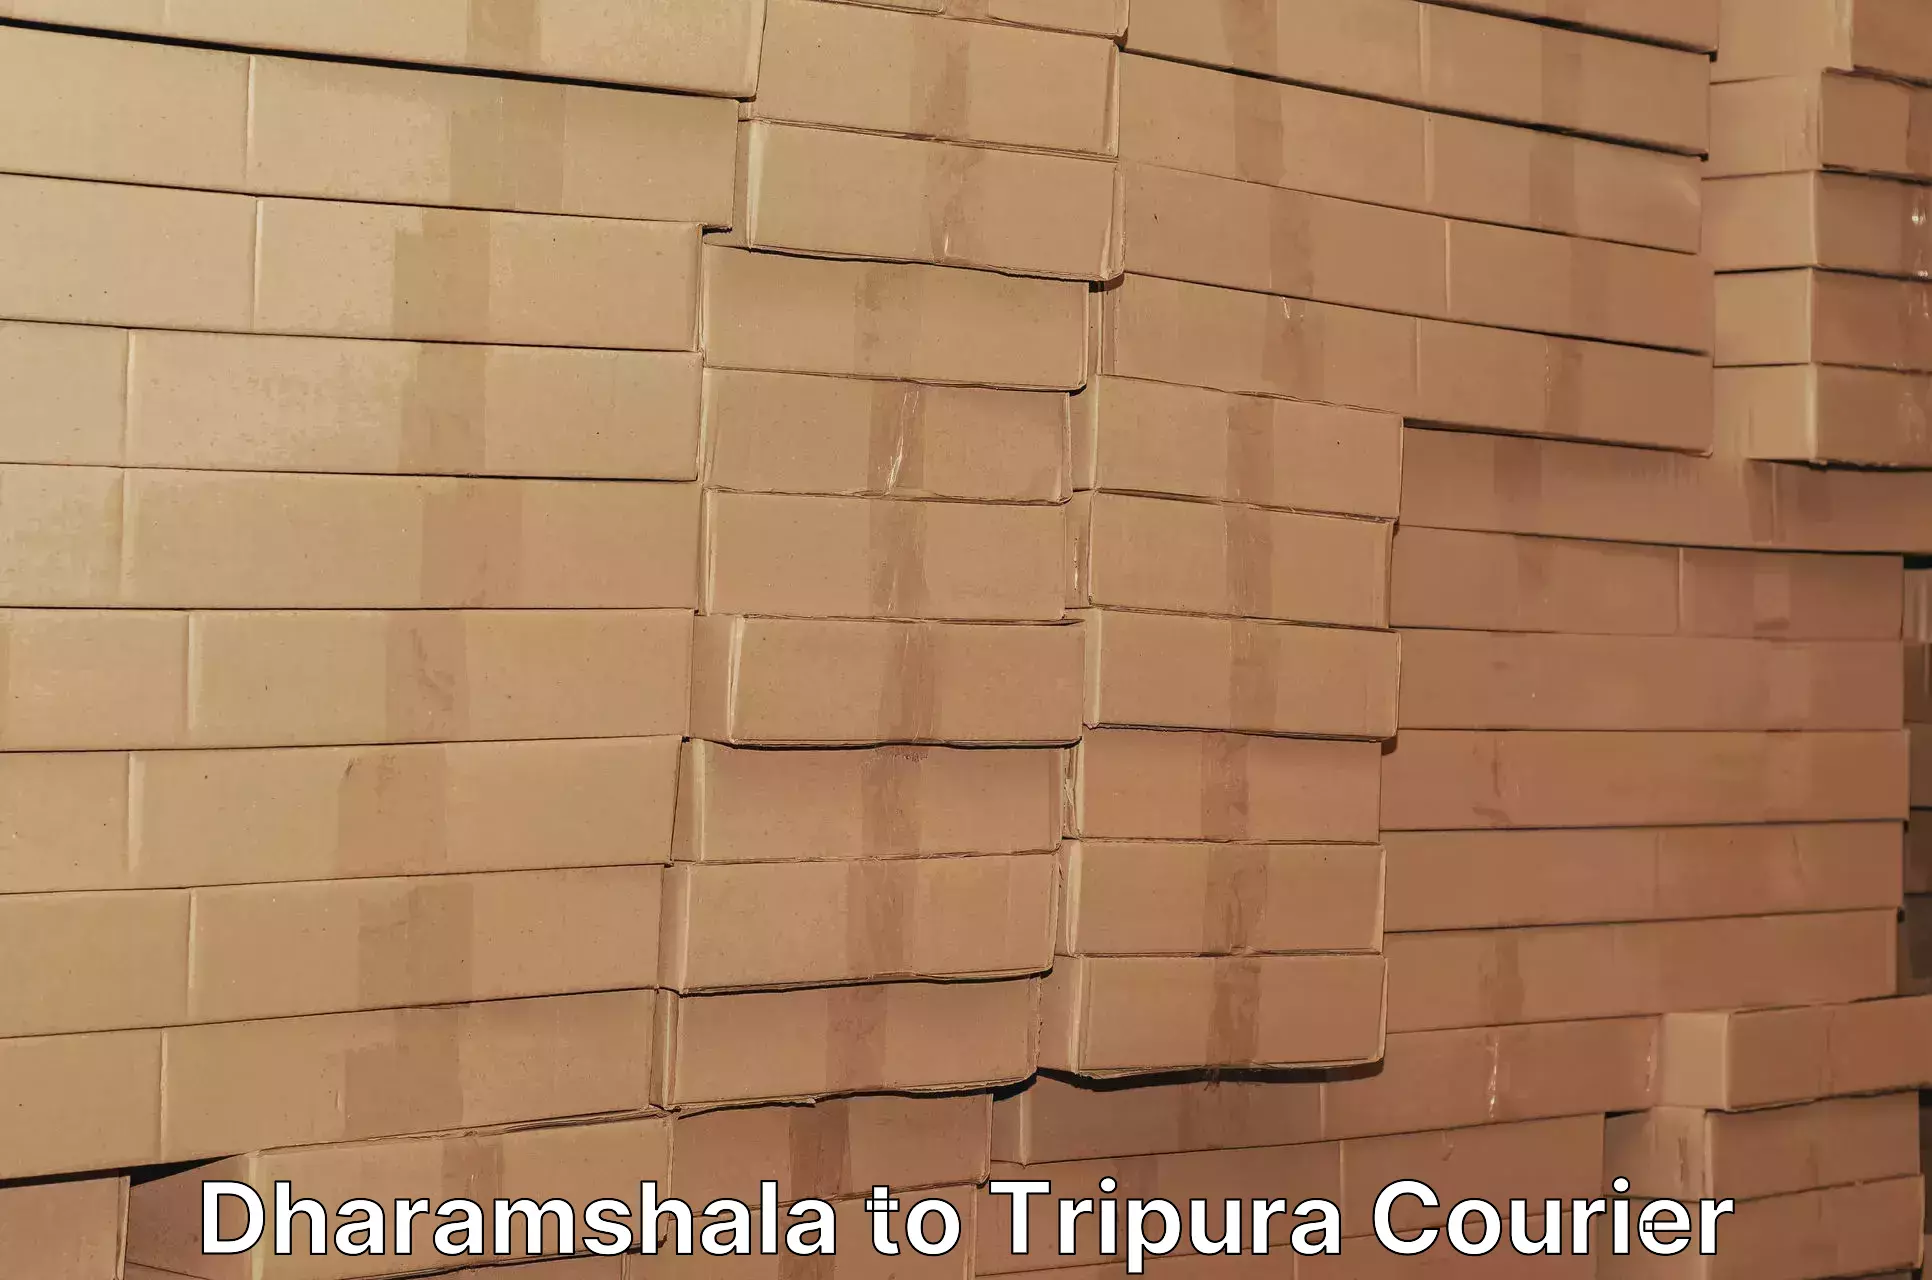 Efficient cargo services Dharamshala to Udaipur Tripura